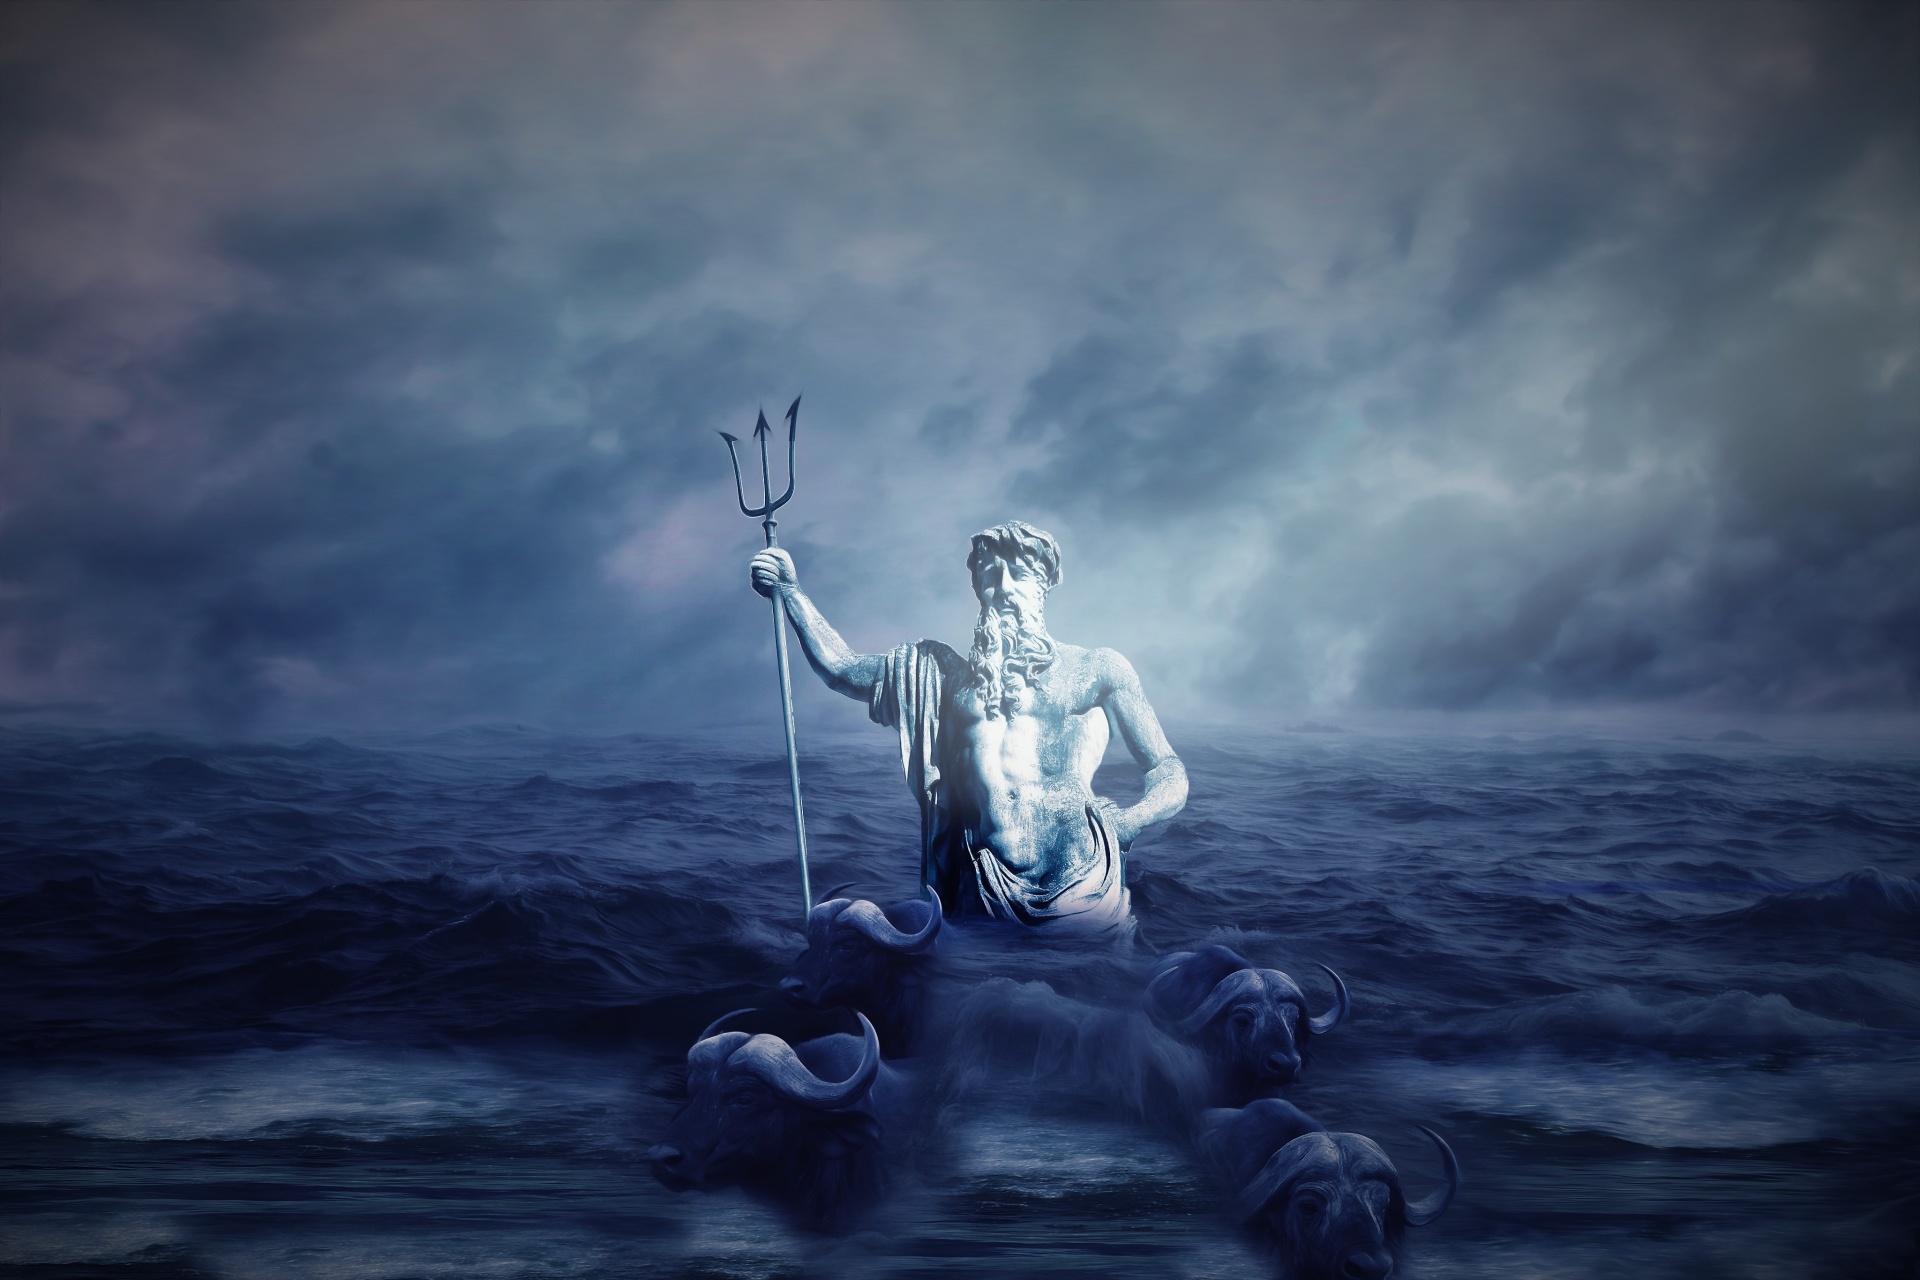 An artist's impression of Neptune, a sea god whose name often appears on lists for what are good ocean names for baby boys